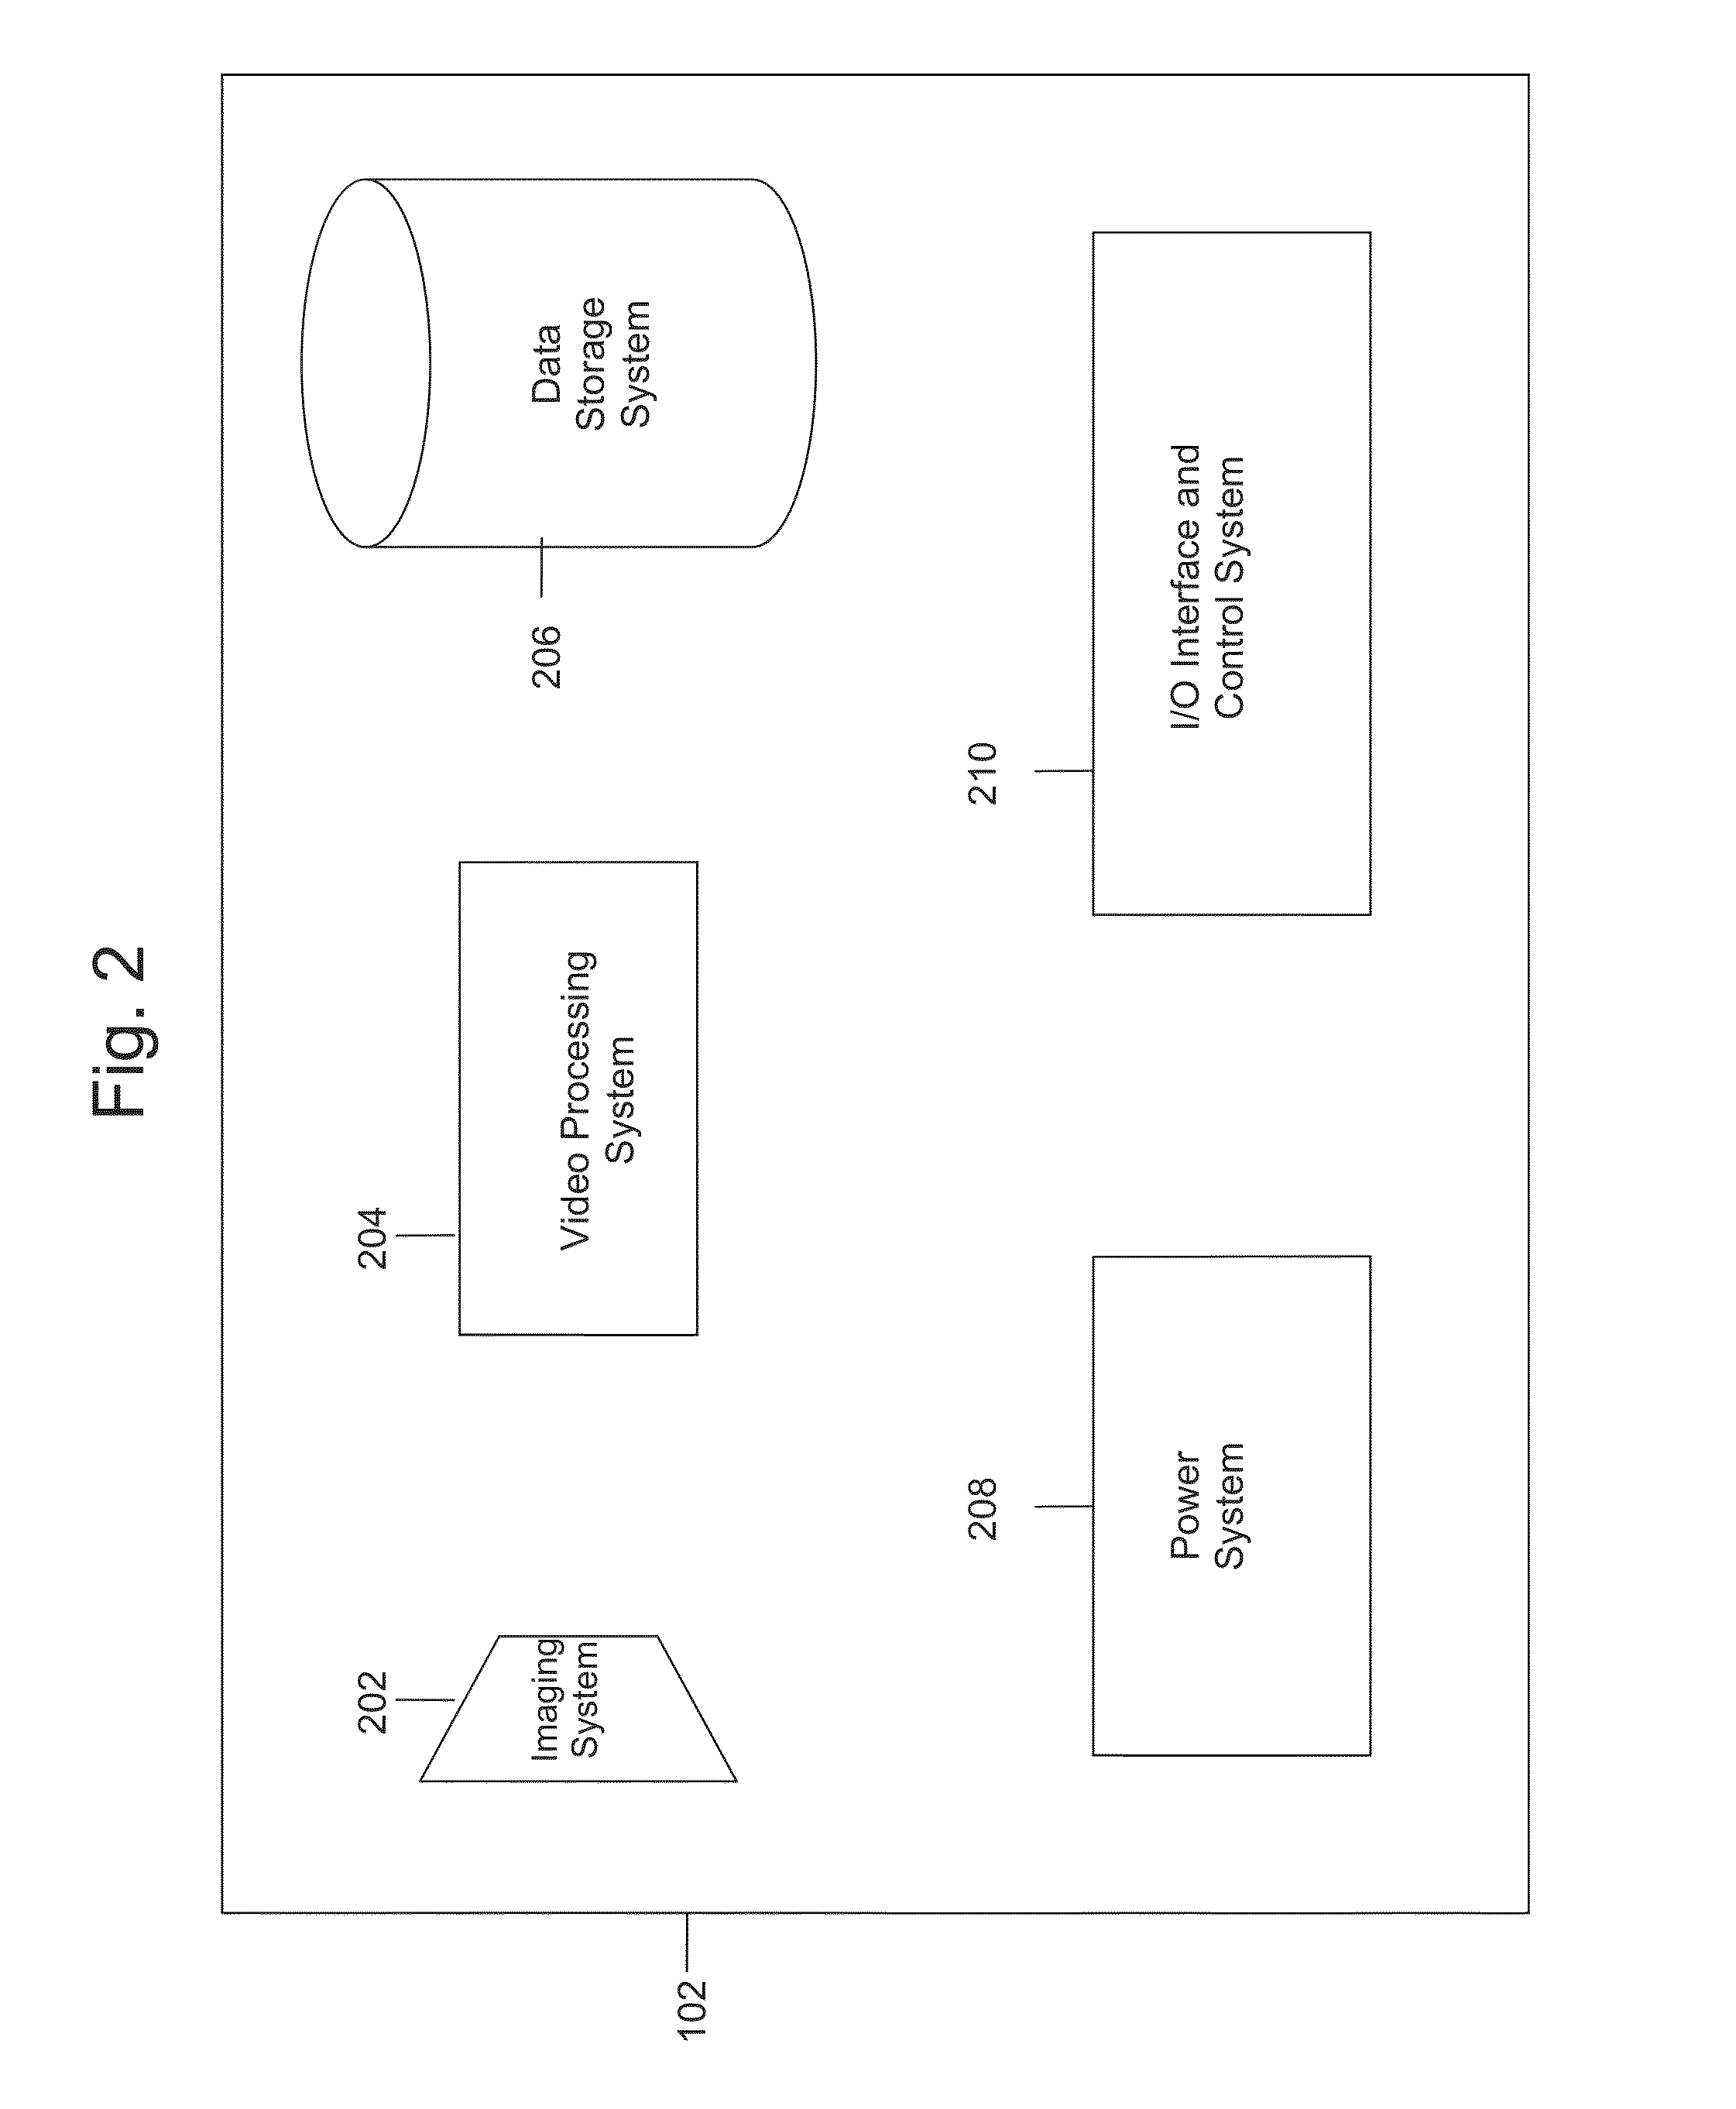 Content-aware computer networking devices with video analytics for reducing video storage and video communication bandwidth requirements of a video surveillance network camera system